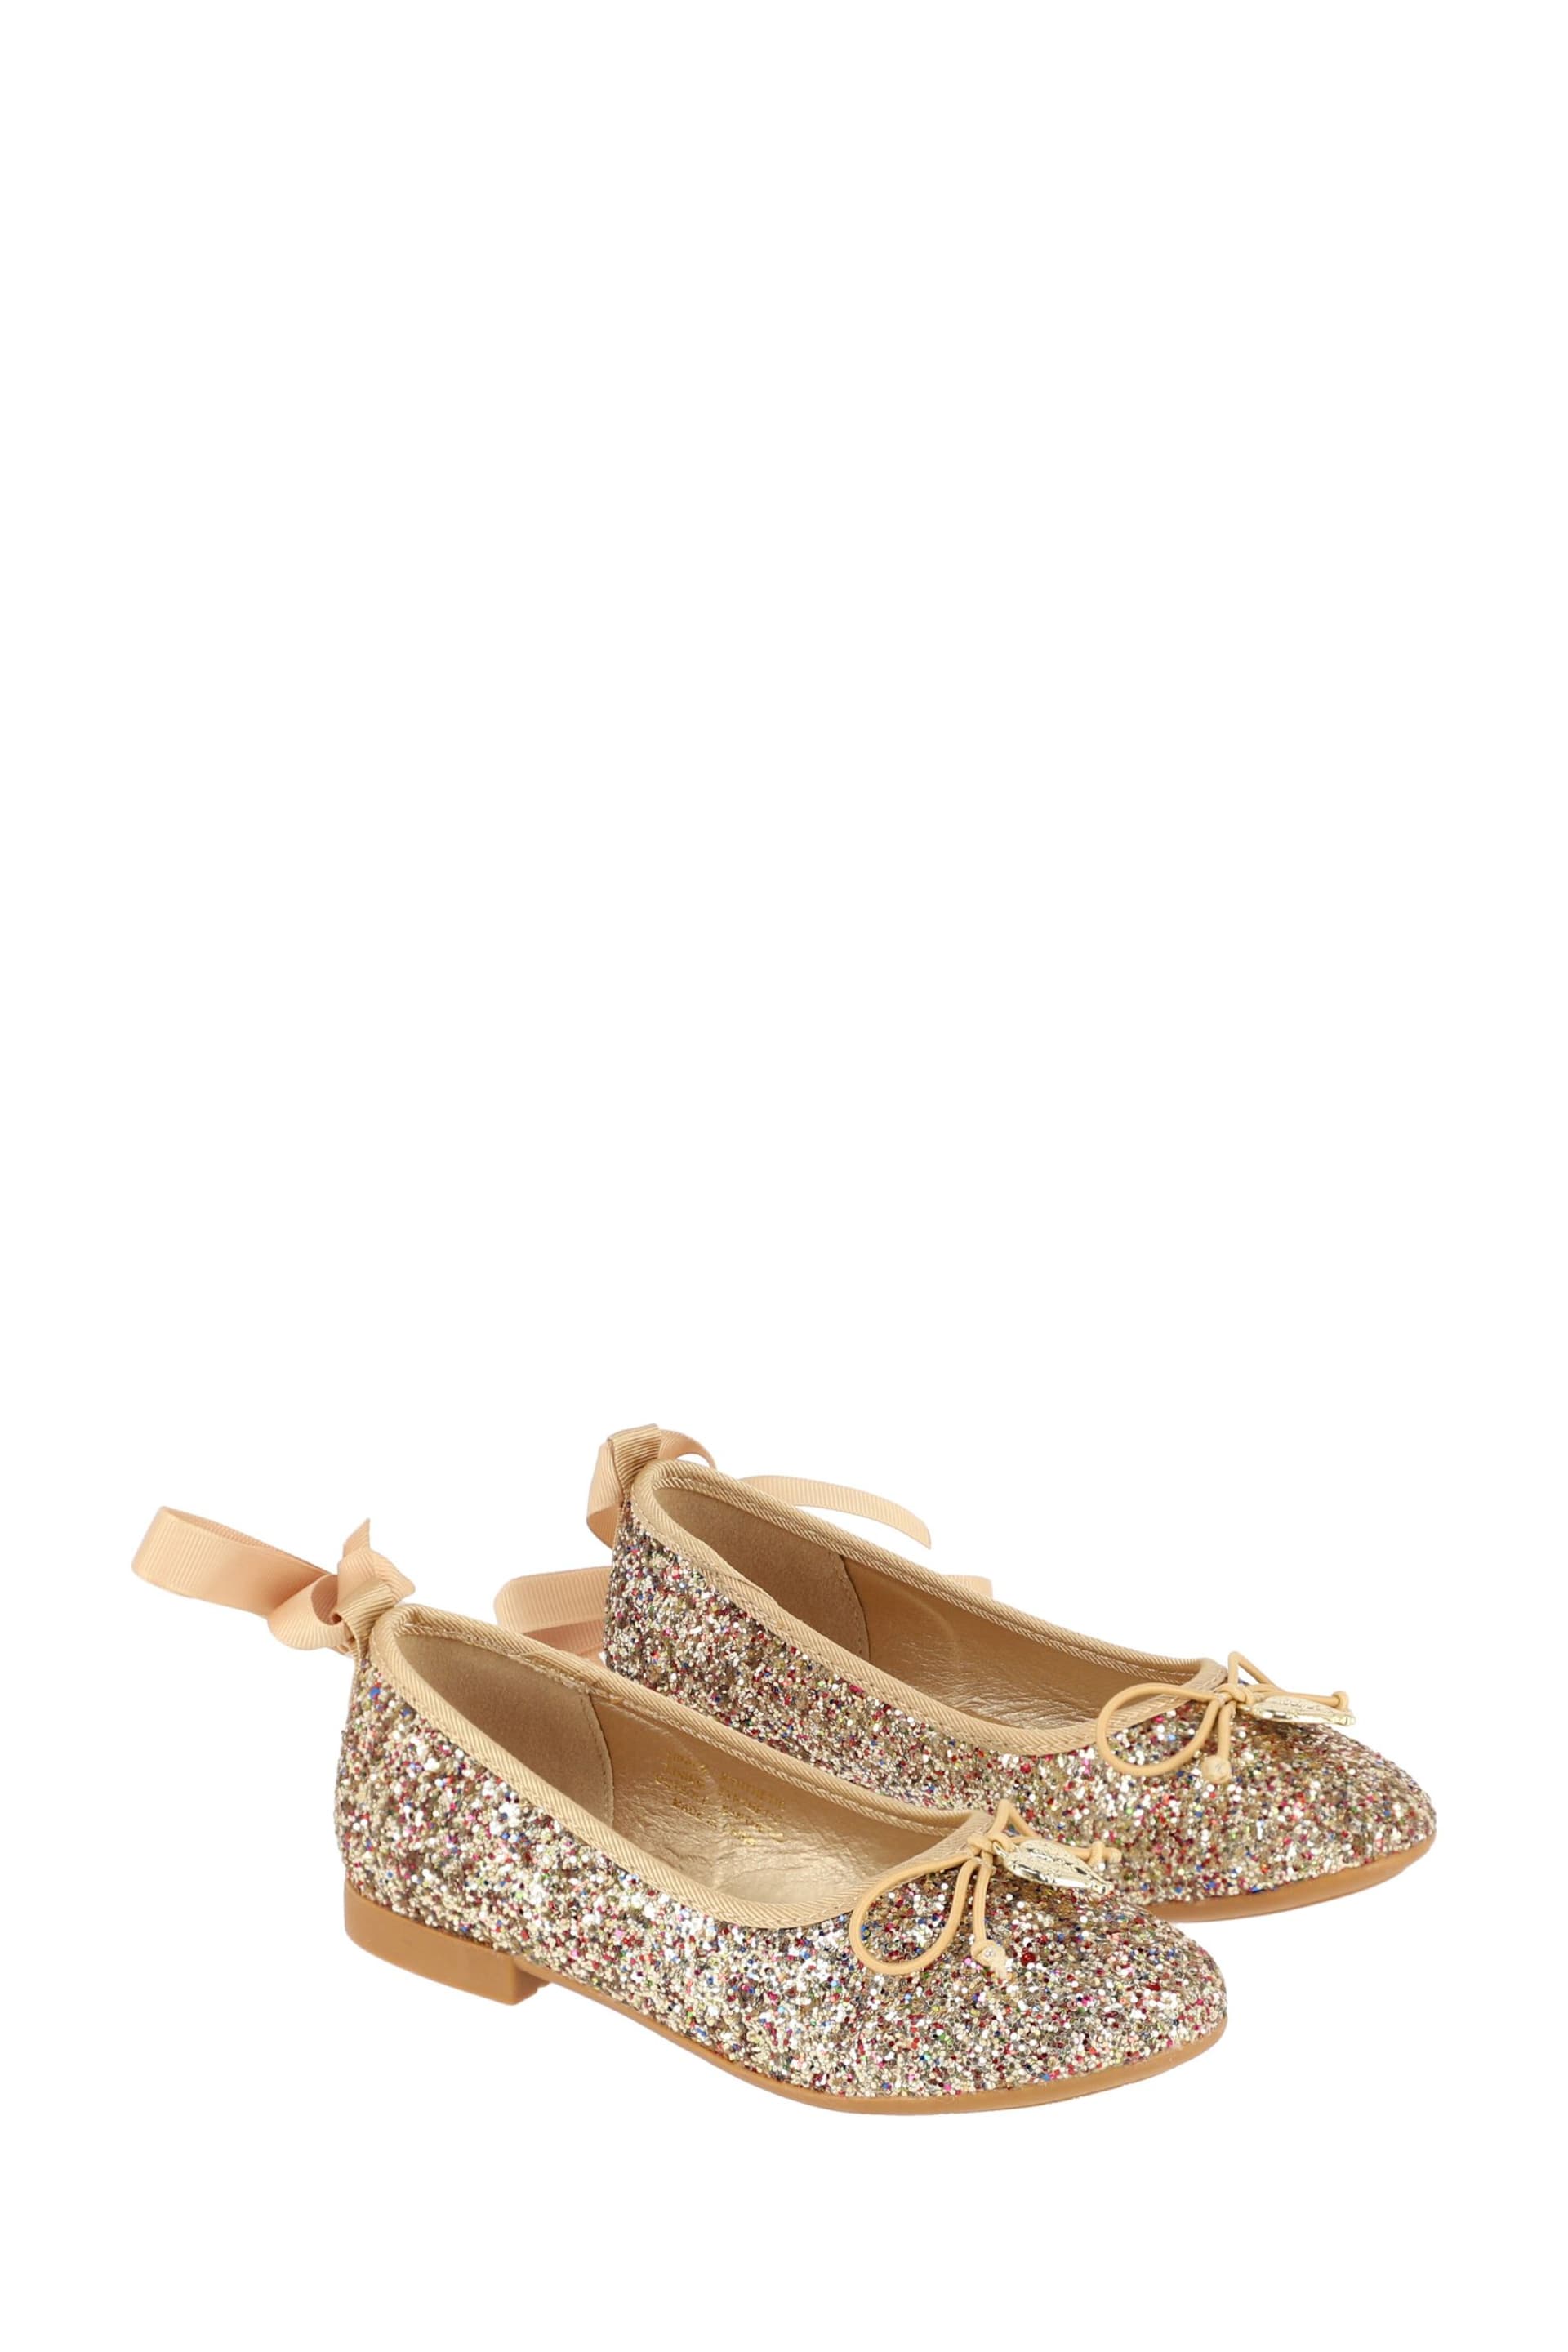 Angels Face Gold Glitterati Toddler Pumps - Image 1 of 1